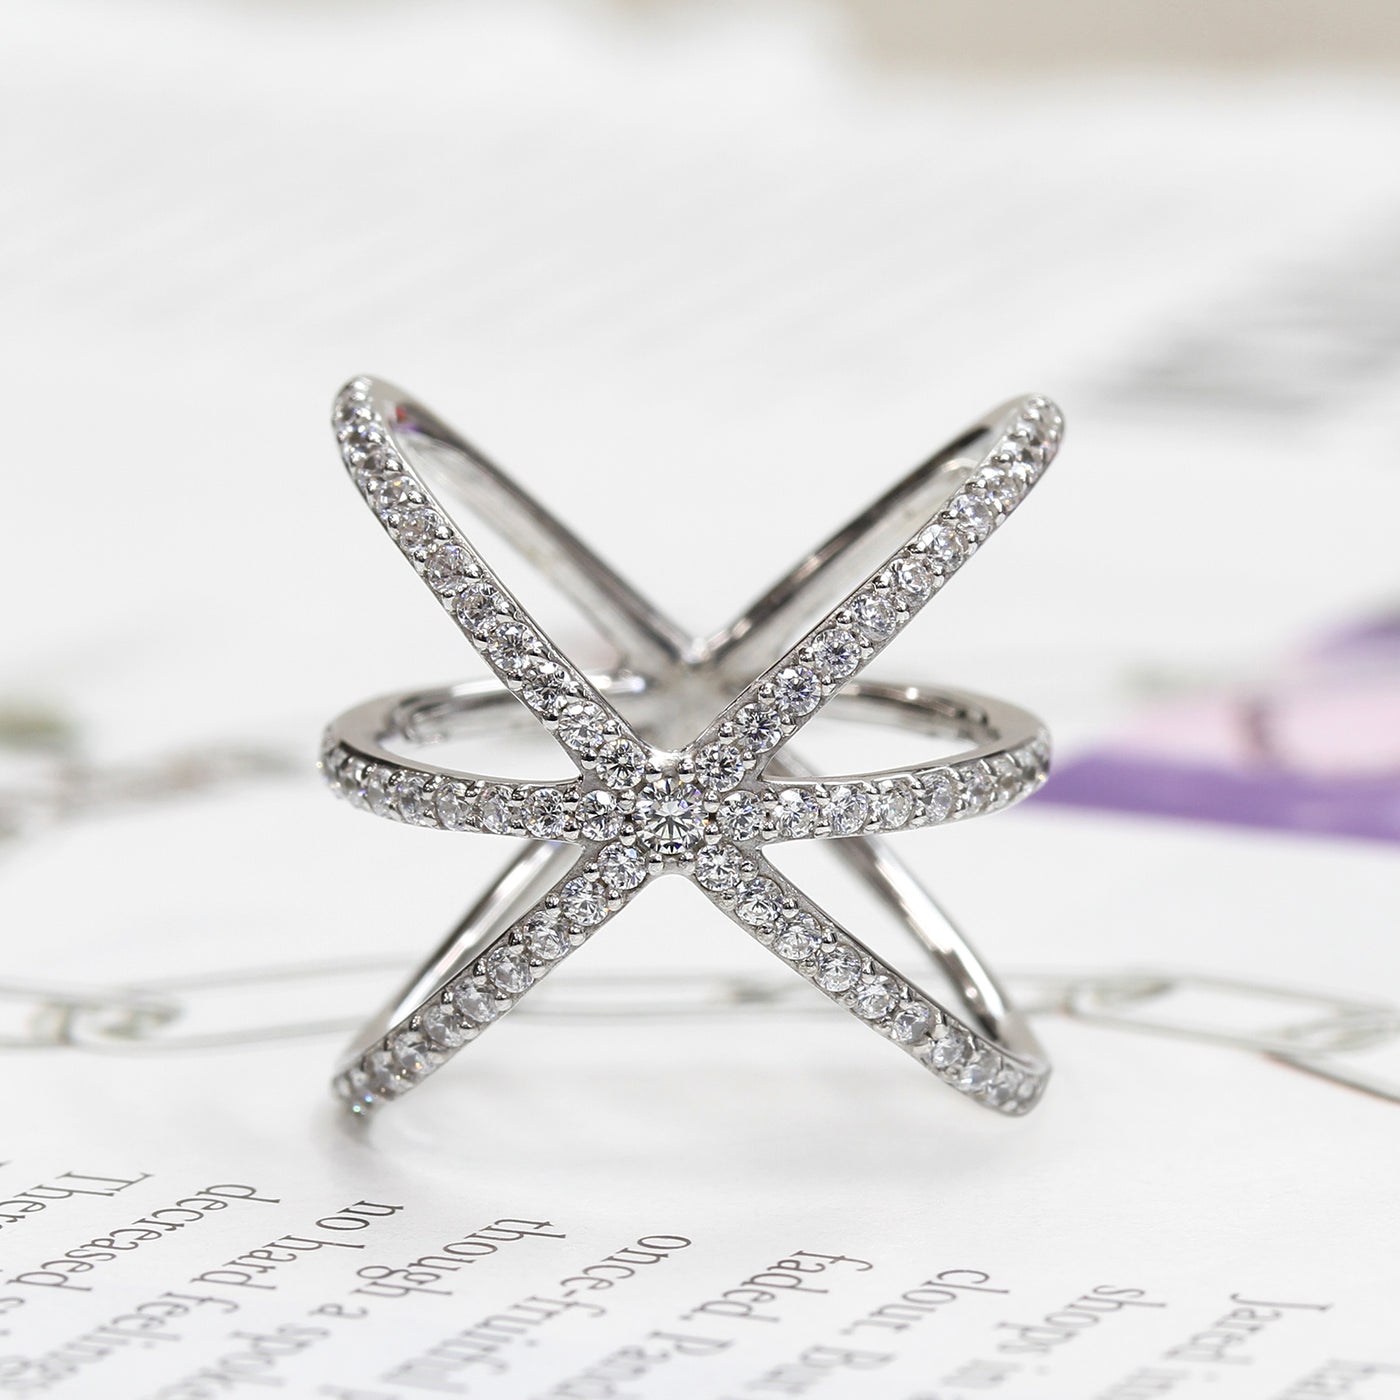 Galaxy Crisscross Ring, Platinum Plated Sterling Silver